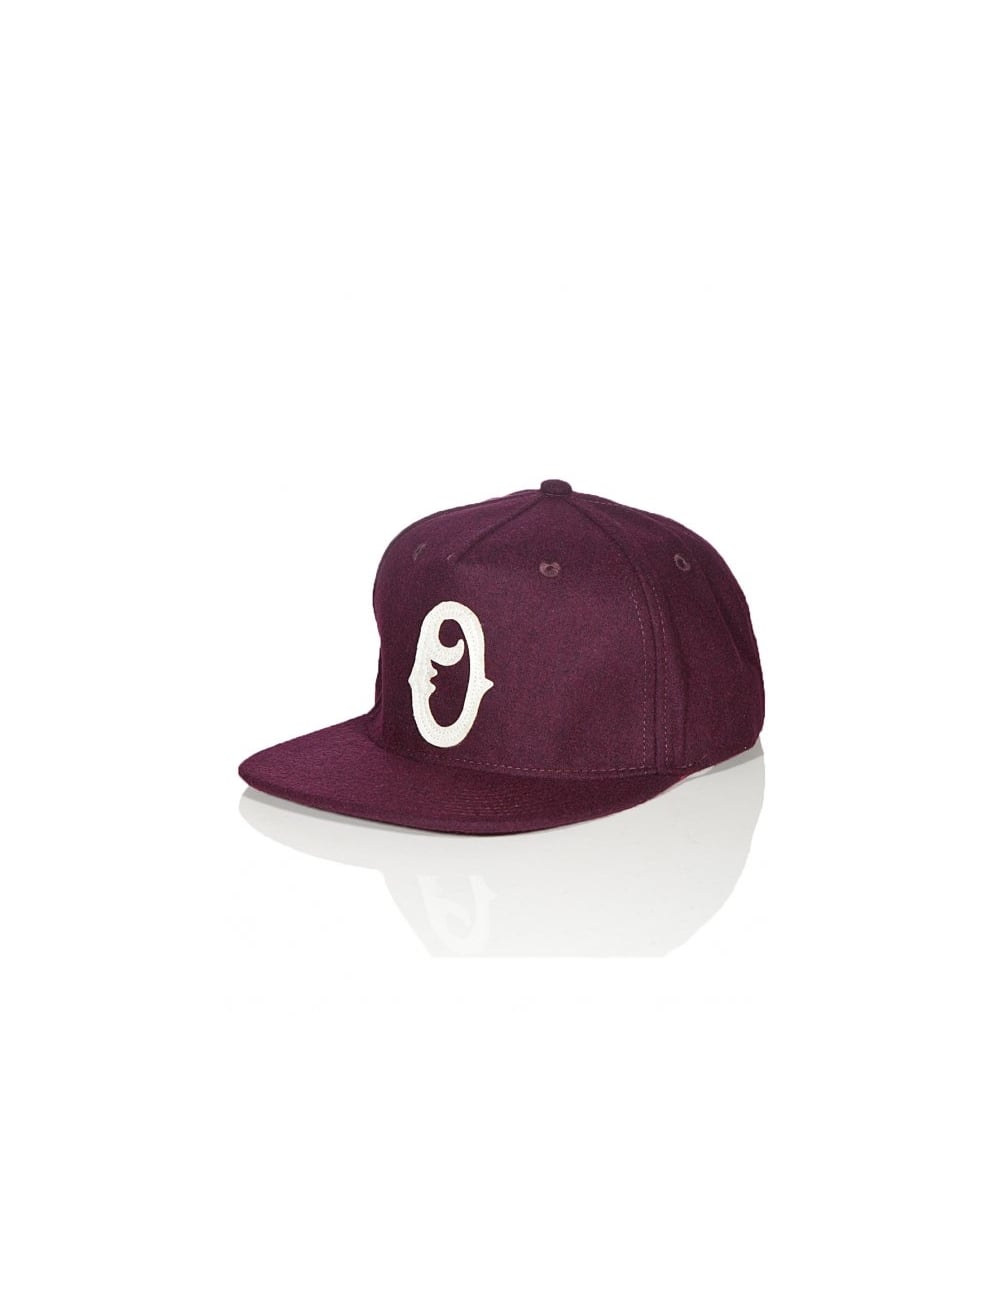 OBEY Clothing Old Logo - Obey Clothing Old Timers Snapback